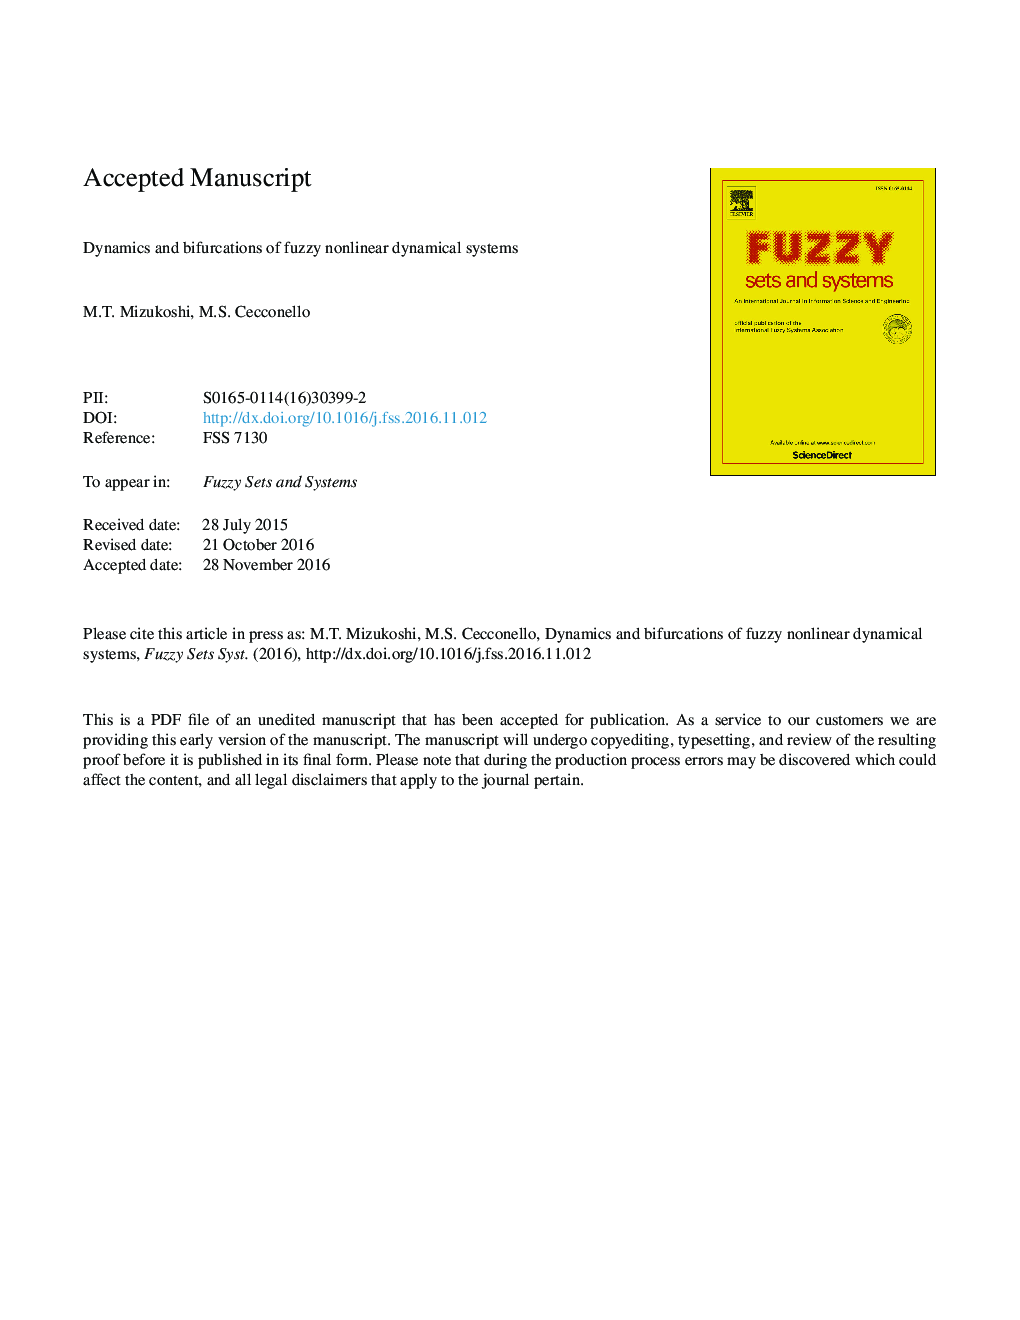 Dynamics and bifurcations of fuzzy nonlinear dynamical systems